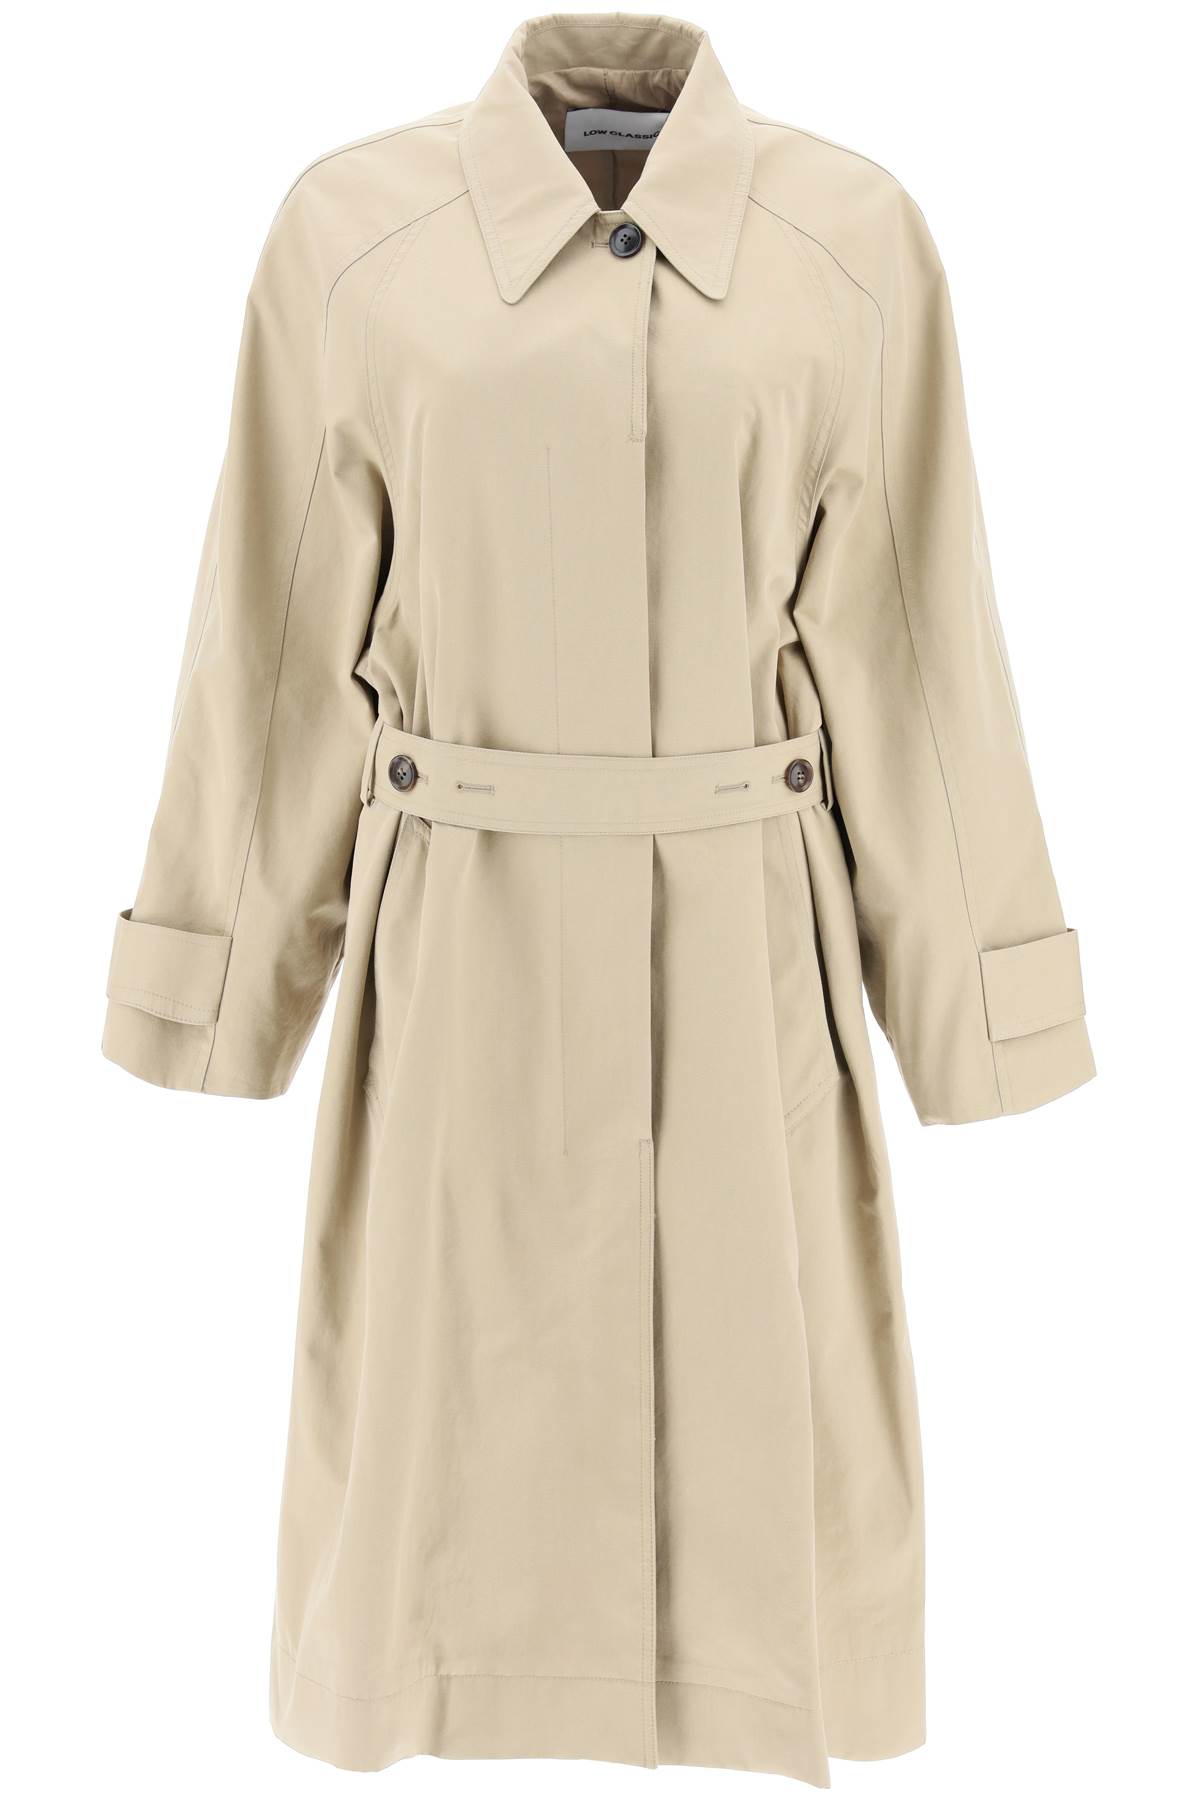 Low Classic new Armhole Belted Trench Coat